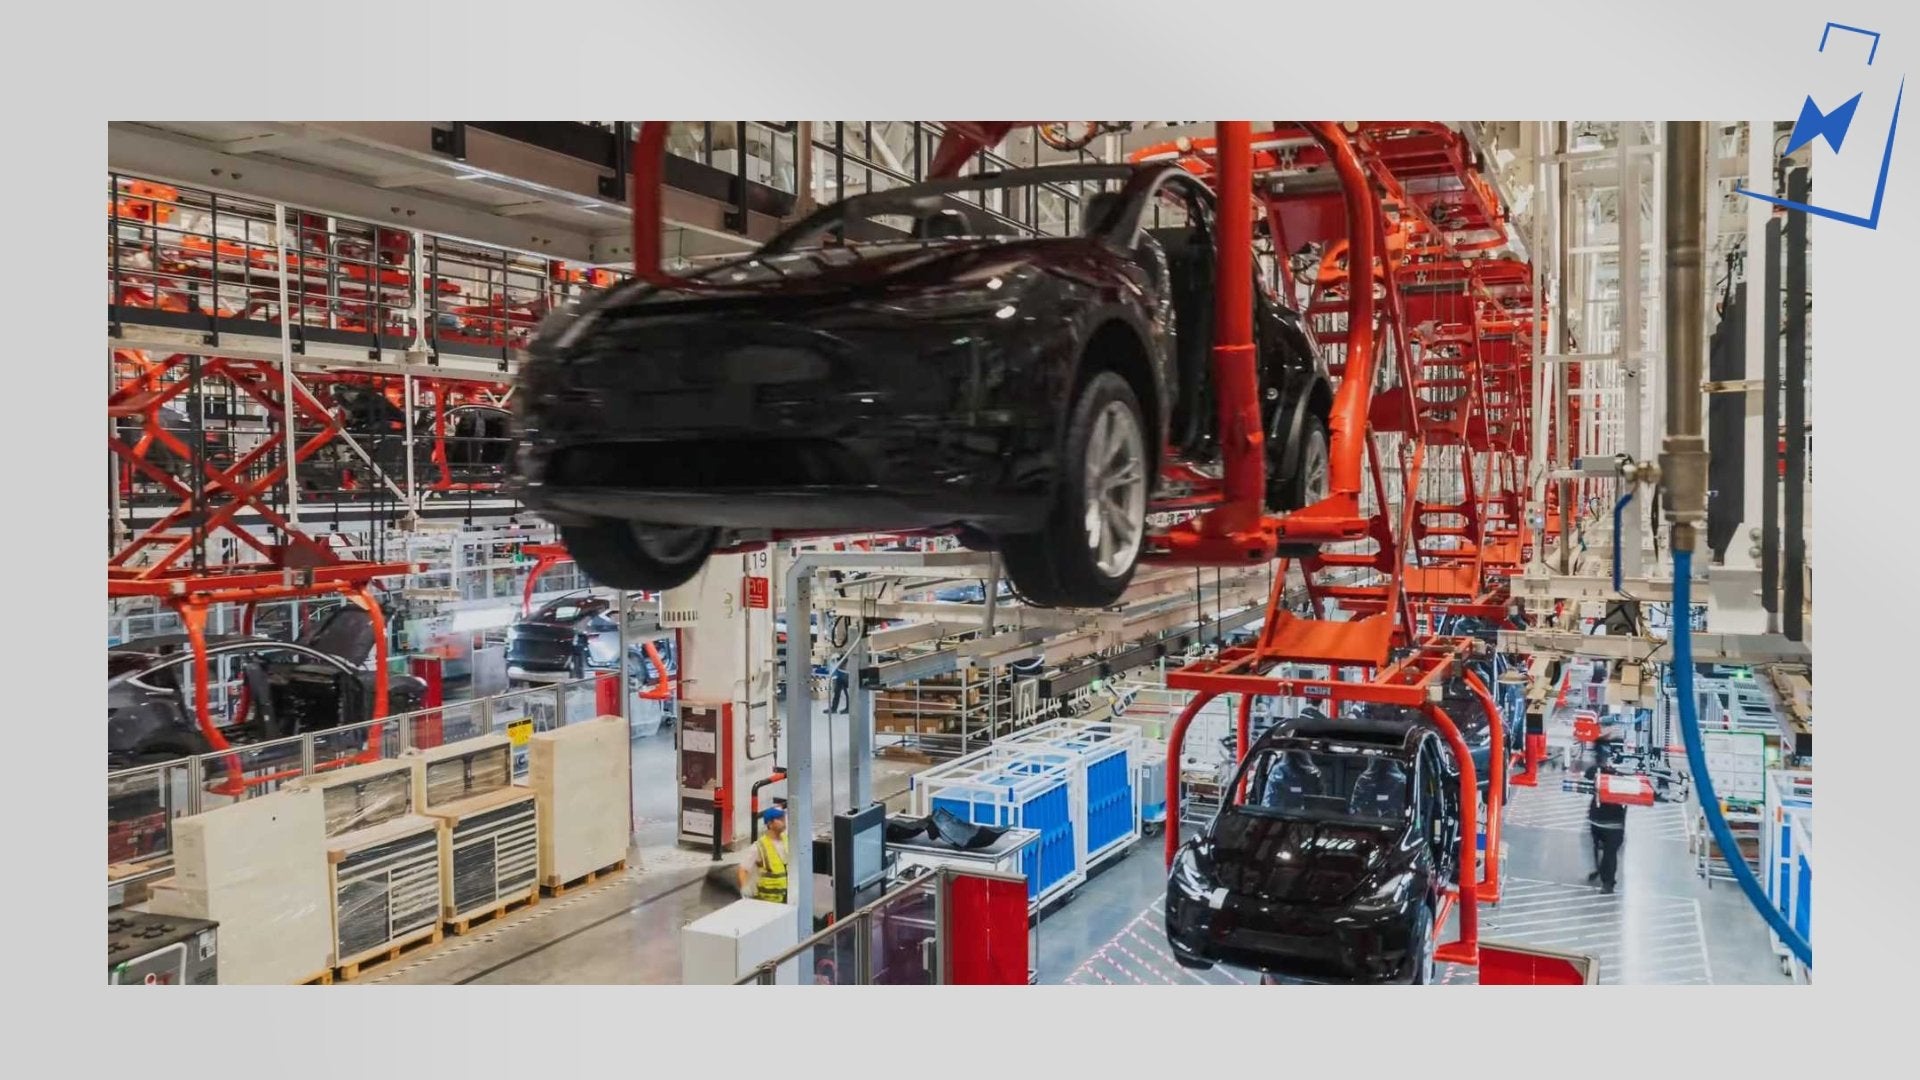 Tesla Model Y with BYD battery has started production in Germany, report  says - CnEVPost